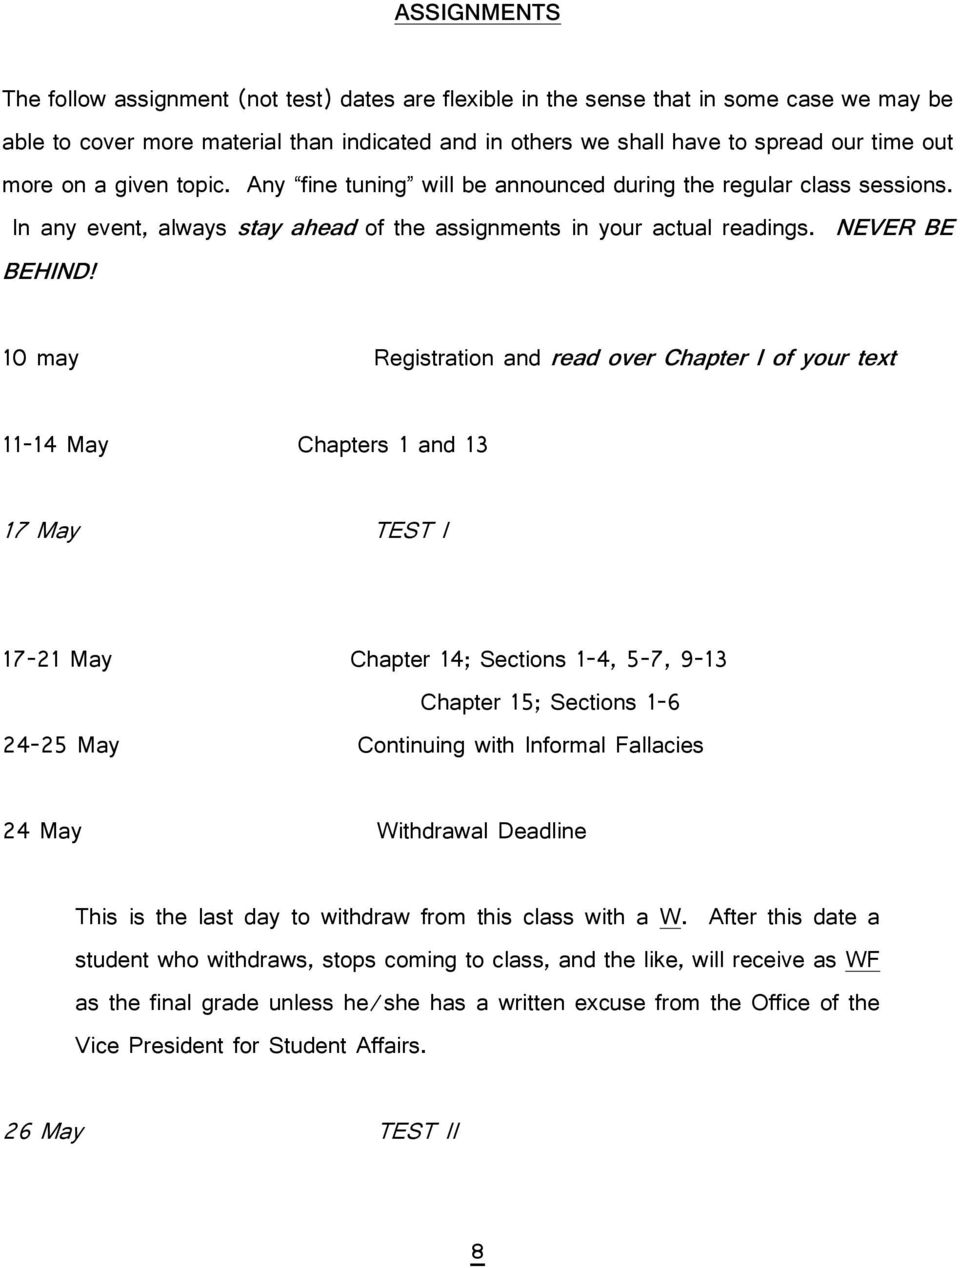 10 may Registration and read over Chapter I of your text 11-14 May Chapters 1 and 13 17 May TEST I 17-21 May Chapter 14; Sections 1-4, 5-7, 9-13 Chapter 15; Sections 1-6 24-25 May Continuing with